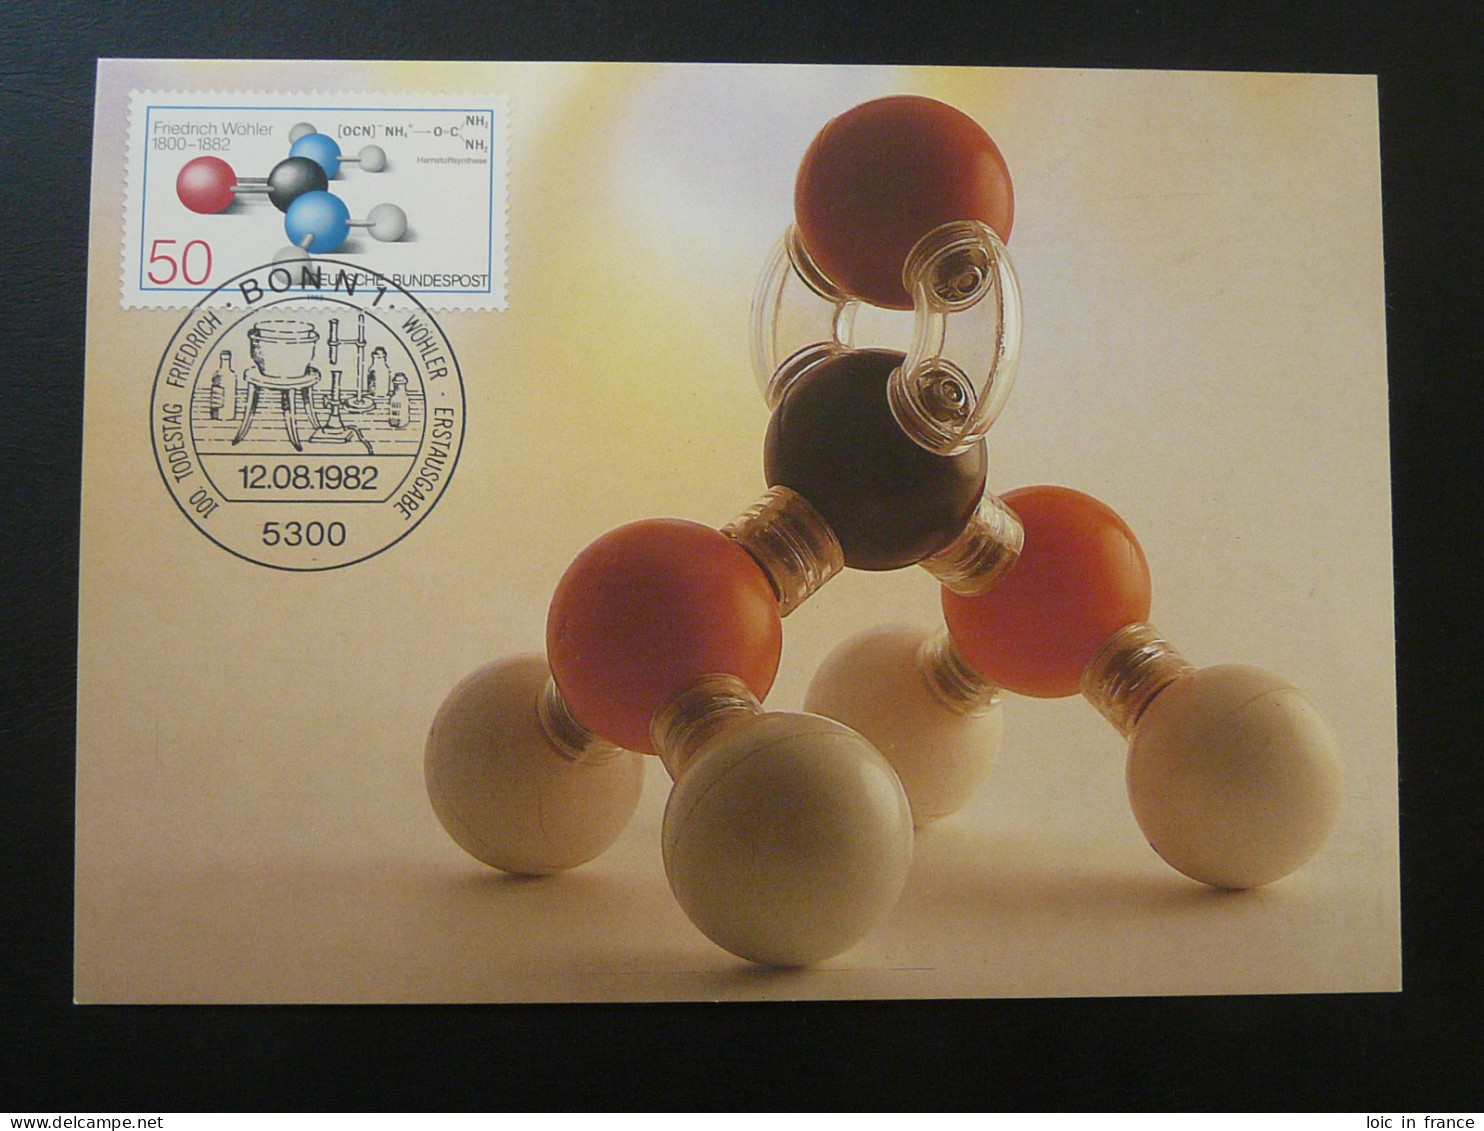 Carte Maximum Card Chimie Chemistry Molecule Allemagne Germany 1982 - Chimica